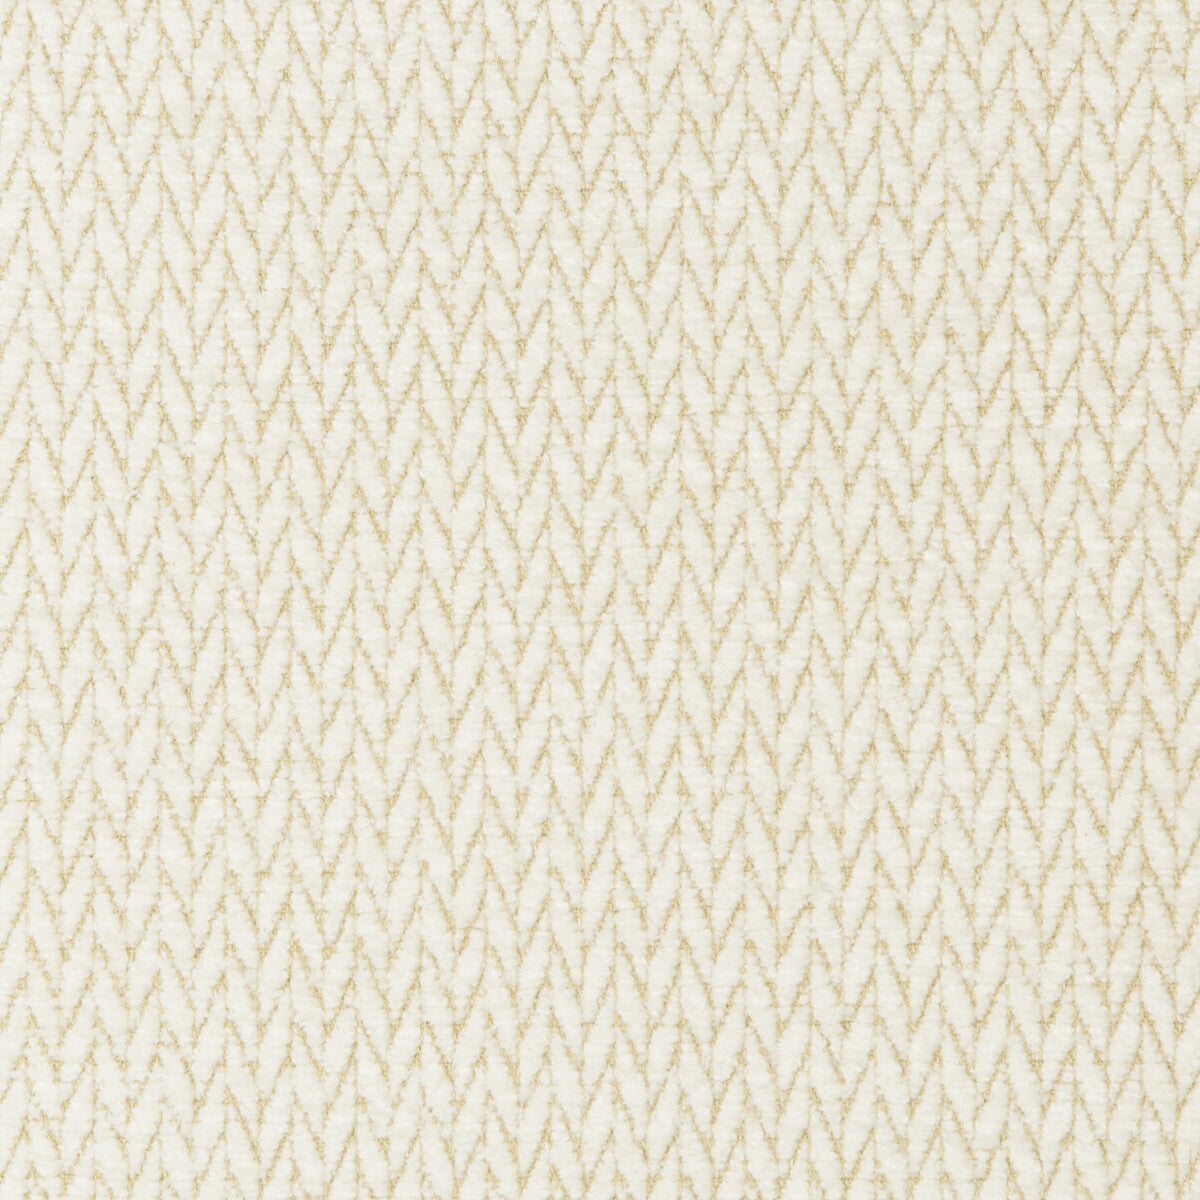 Cassien Texture fabric in ivory color - pattern 8019146.1.0 - by Brunschwig &amp; Fils in the Chambery Textures II collection